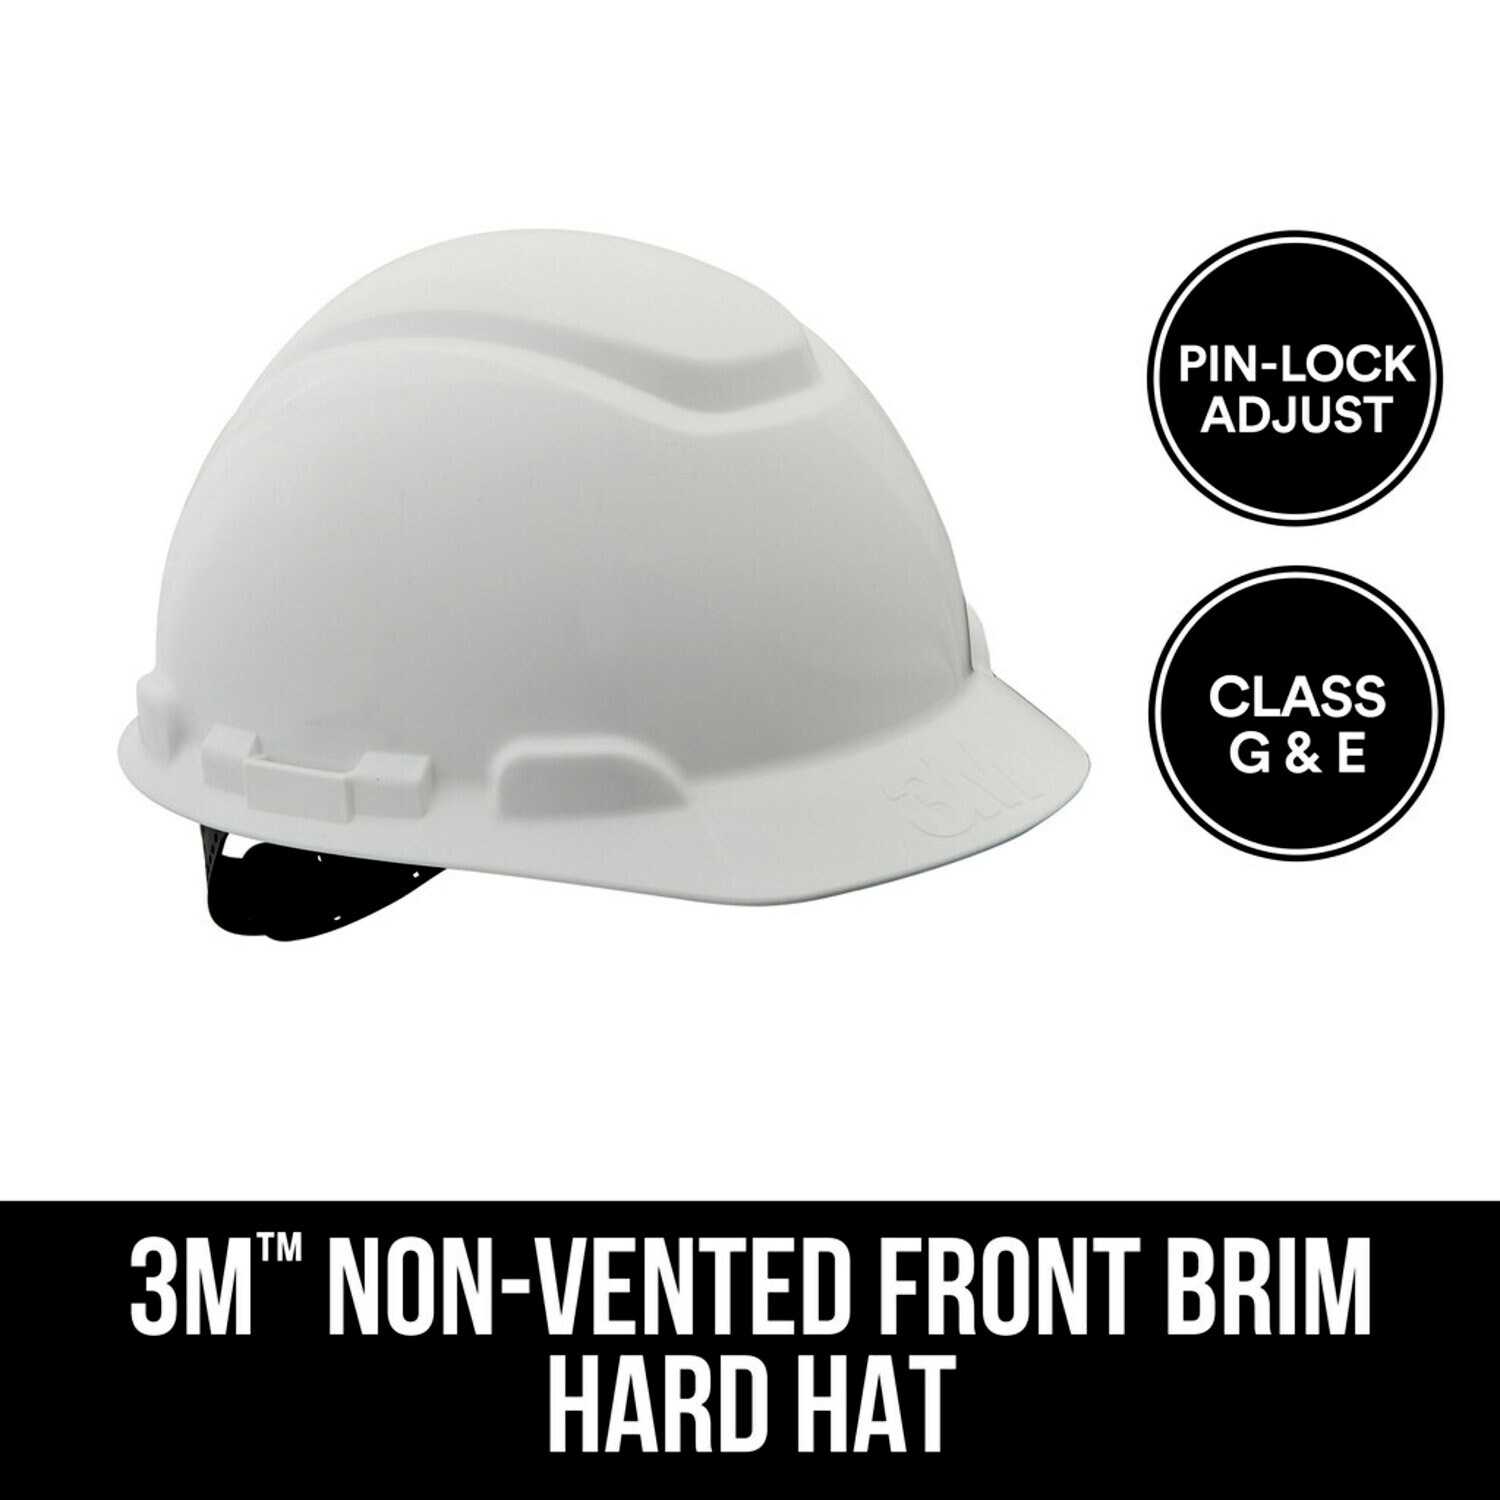 7100153546 - 3M Non-Vented Hard Hat with Pinlock Adjustment, CHHWH1-12-DC, 12/case